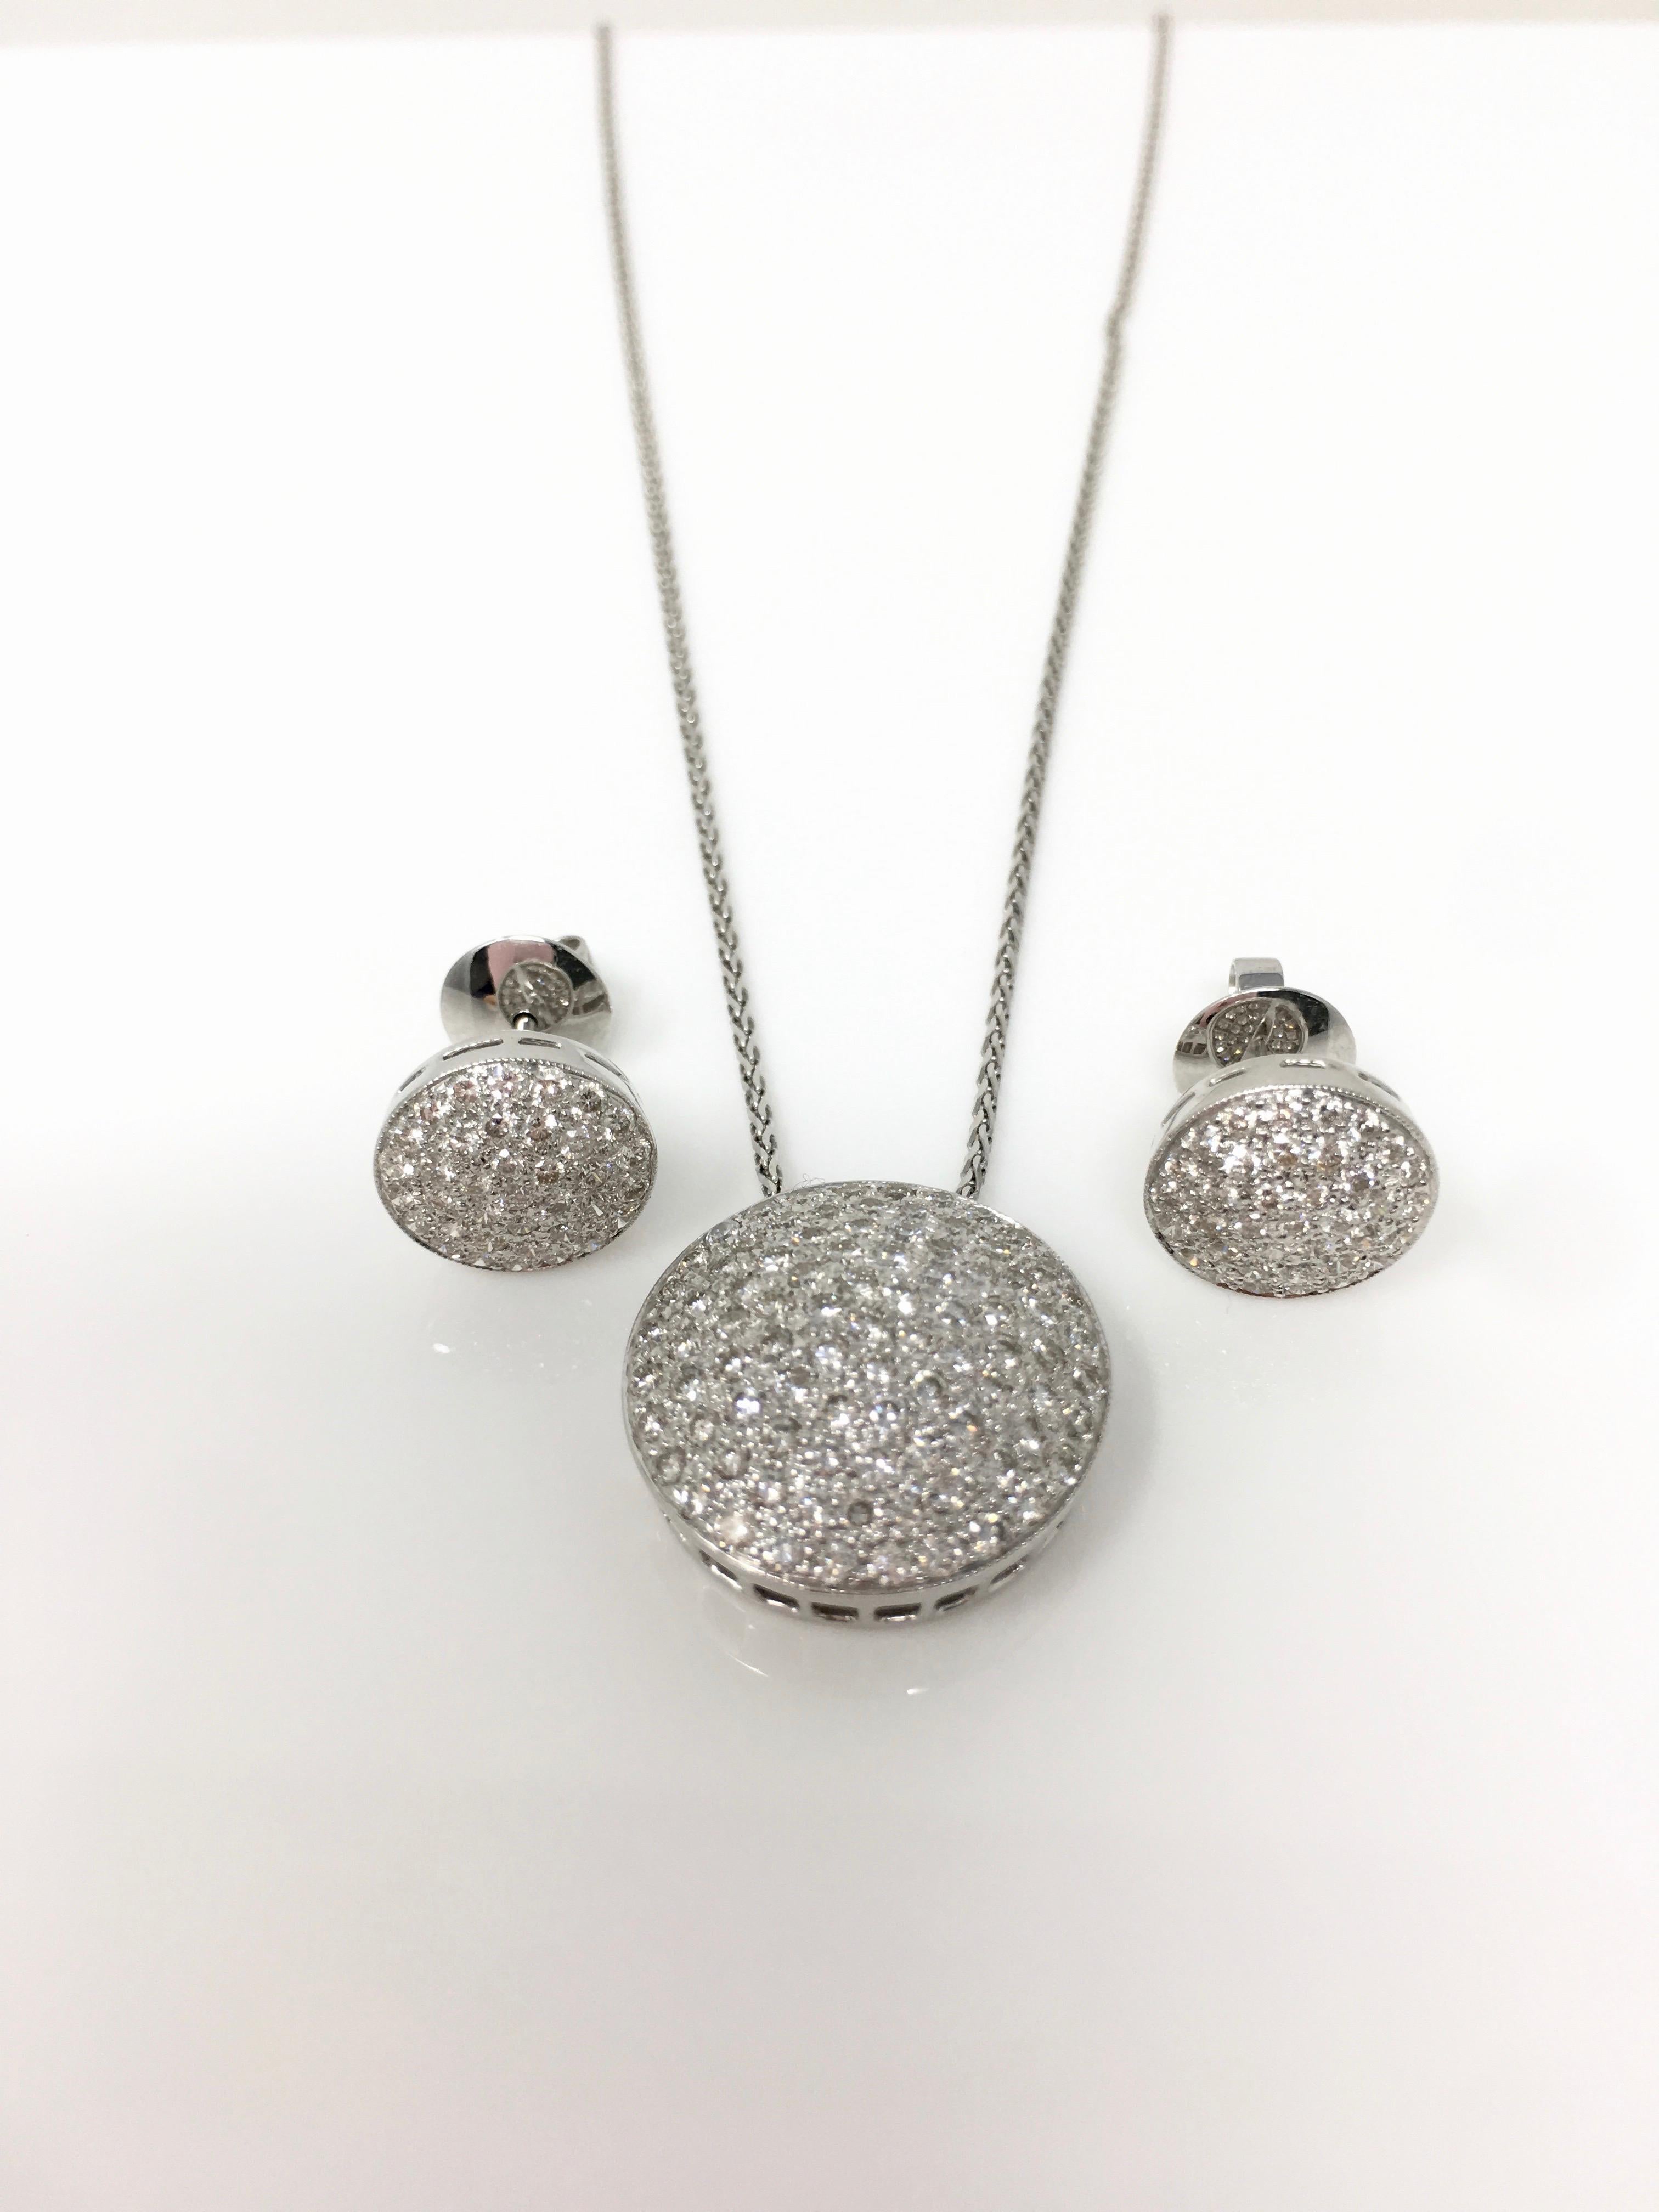 This gorgeous and elegant creation by Moguldiam Inc features custom handmade pair of earrings and a beautiful pendant necklace. The diamond weight of this three piece pendant set is 2.63 carat ( Pendant - 1.50 carat and earring studs - 1.13 carat)